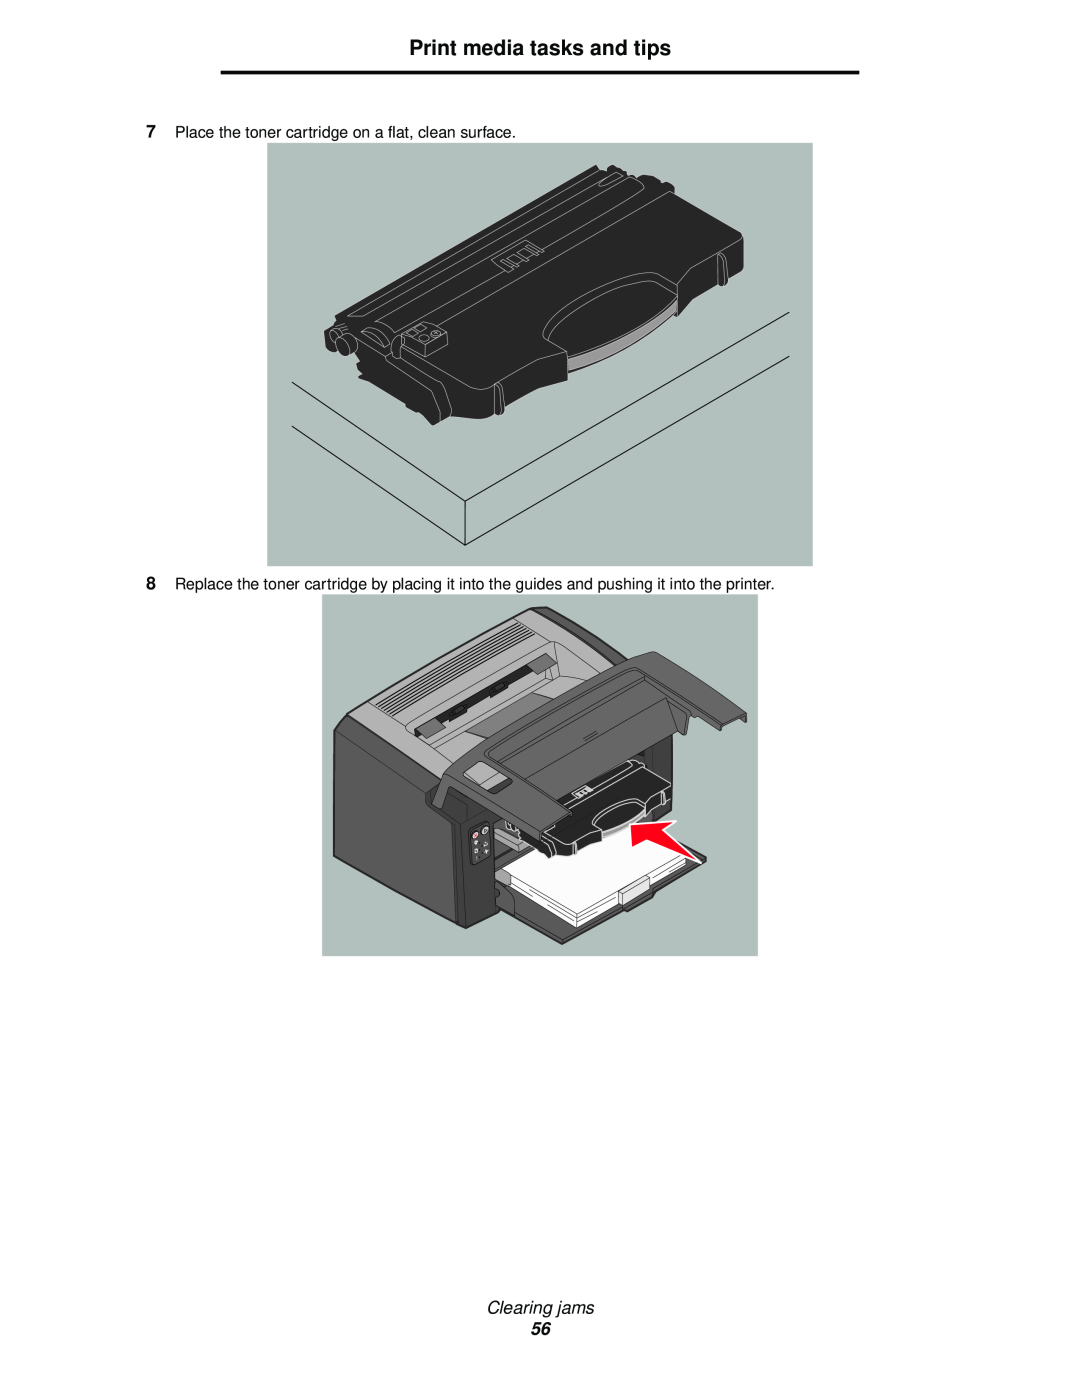 Lexmark 120 manual Print media tasks and tips, Clearing jams, Place the toner cartridge on a flat, clean surface 